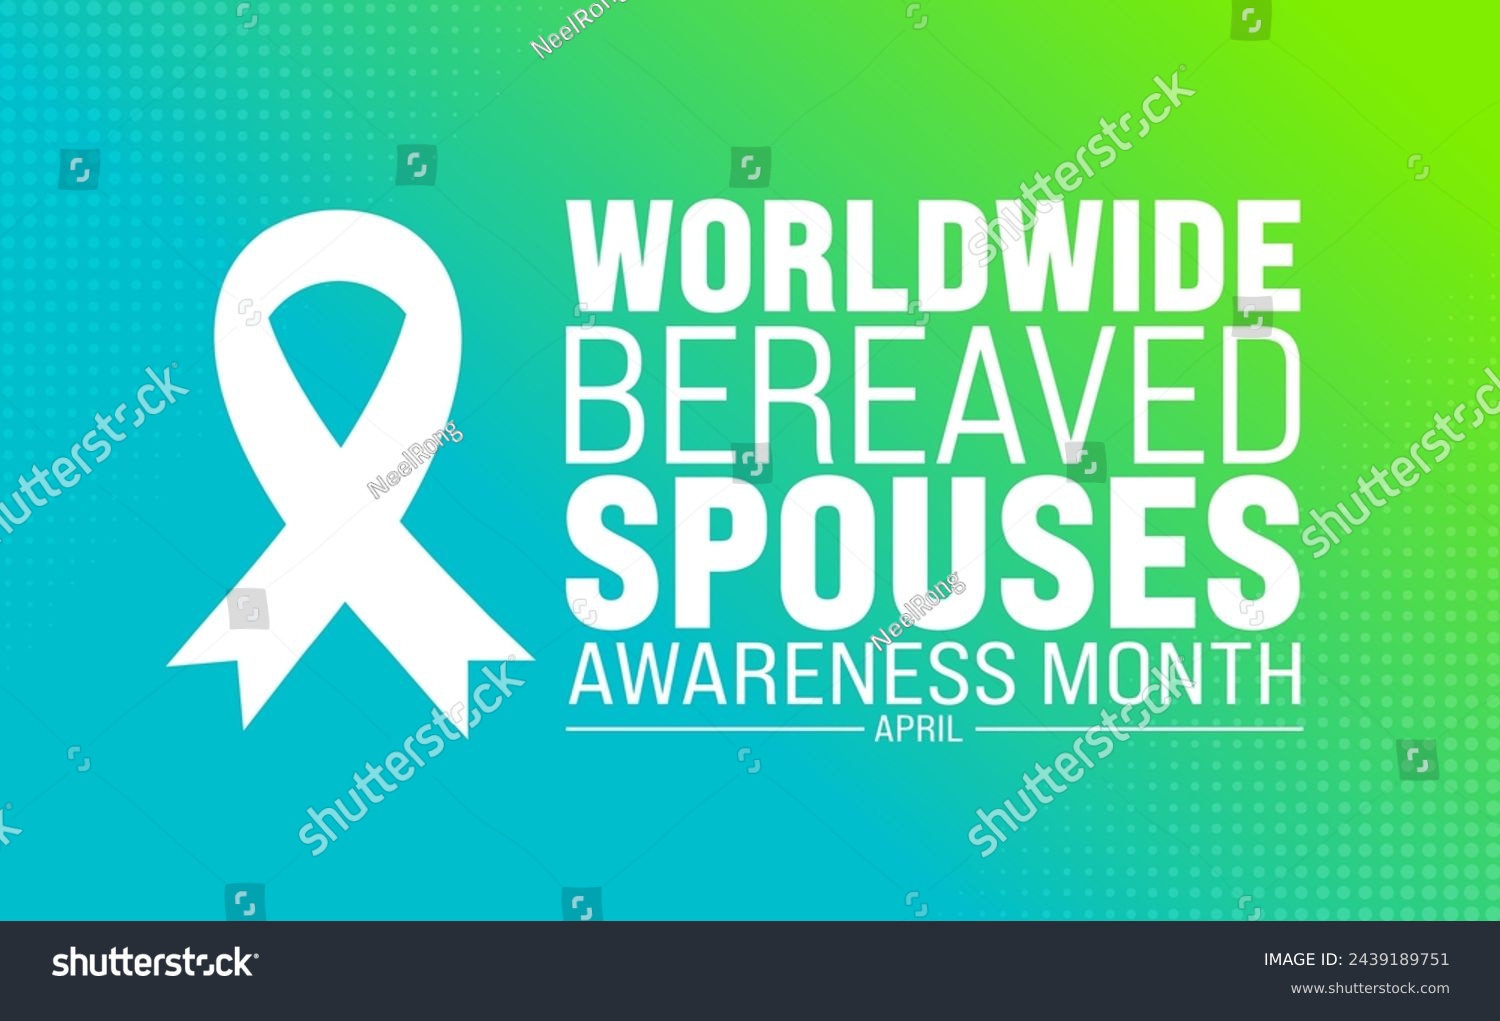 SVG of April is Worldwide Bereaved Spouses Awareness Month background template. Holiday concept. use to background, banner, placard, card, and poster design template with text inscription and standard color. svg